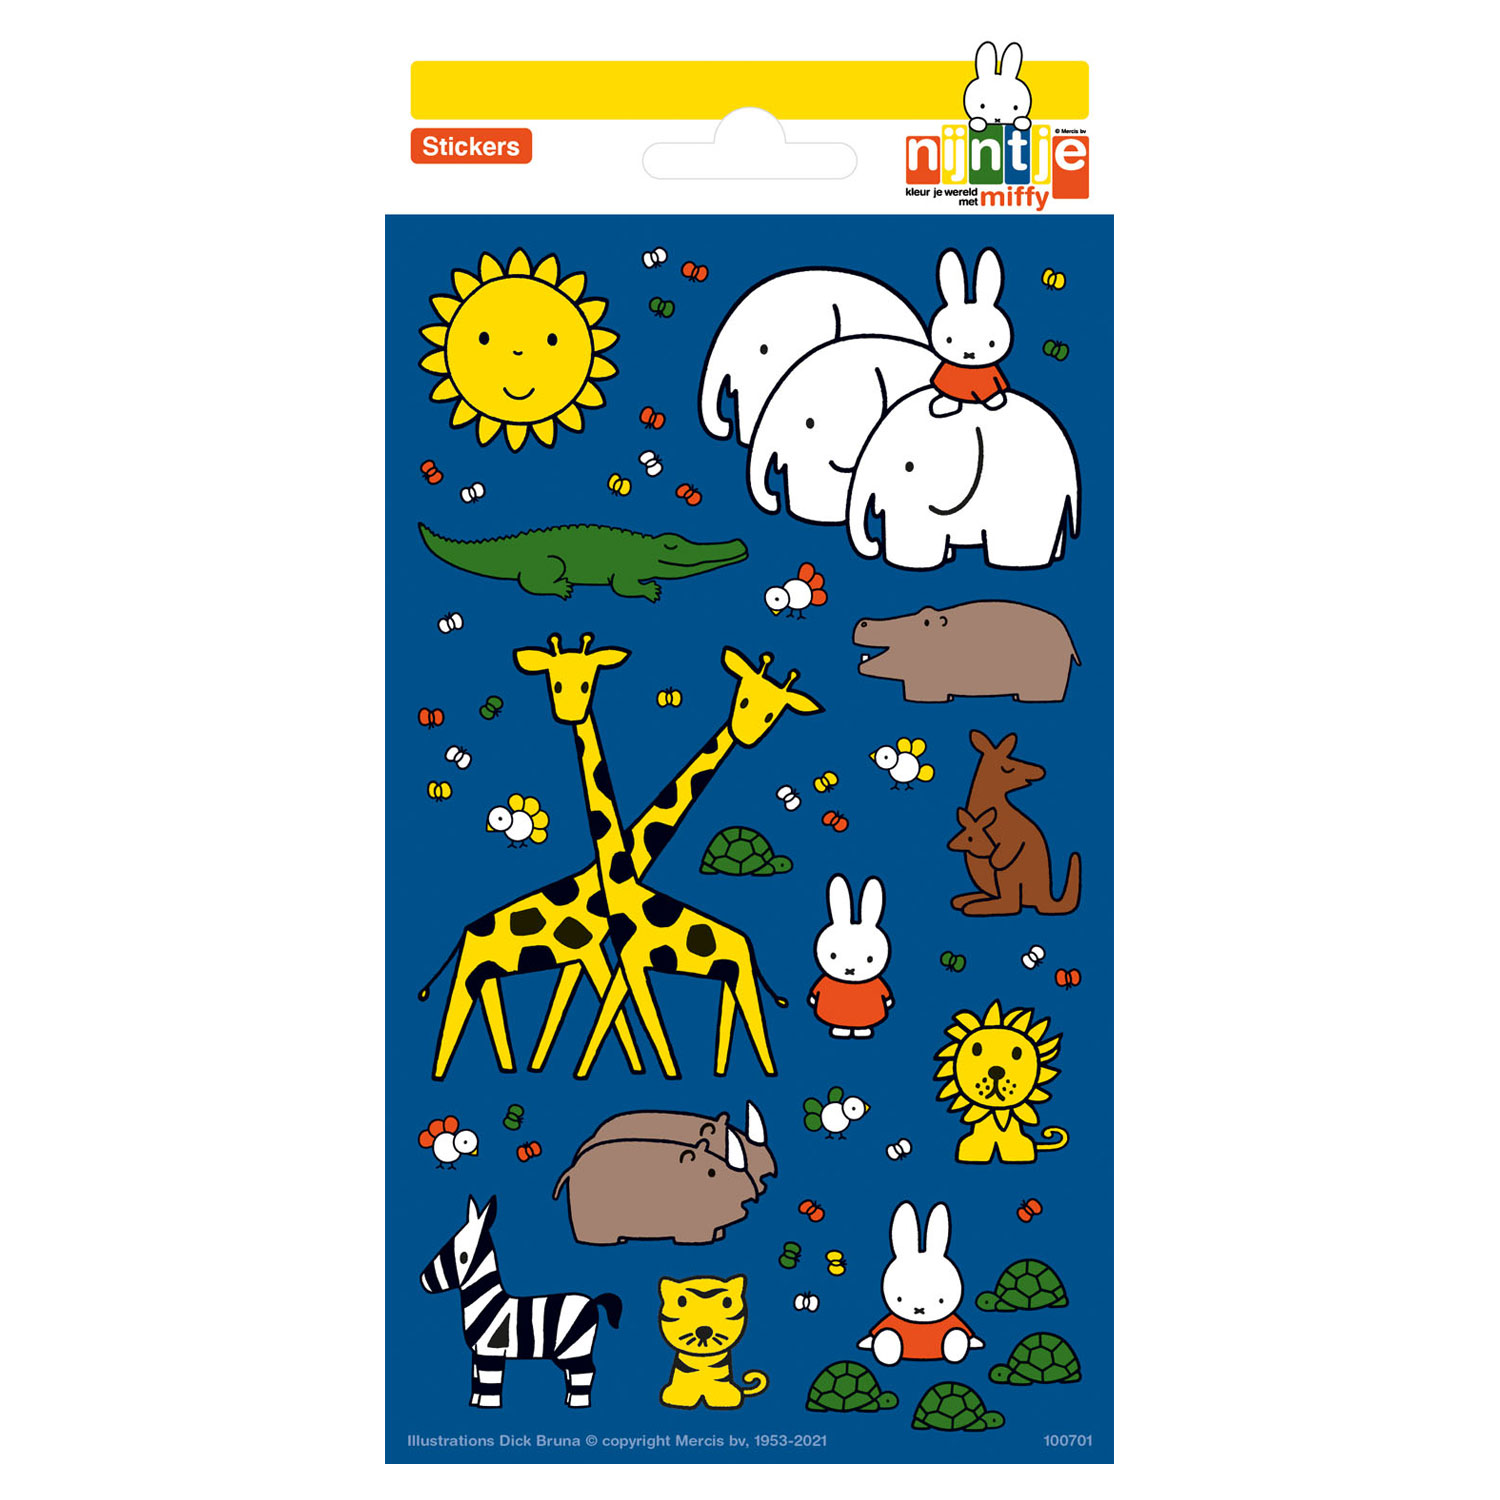 Miffy Stickers for Sale